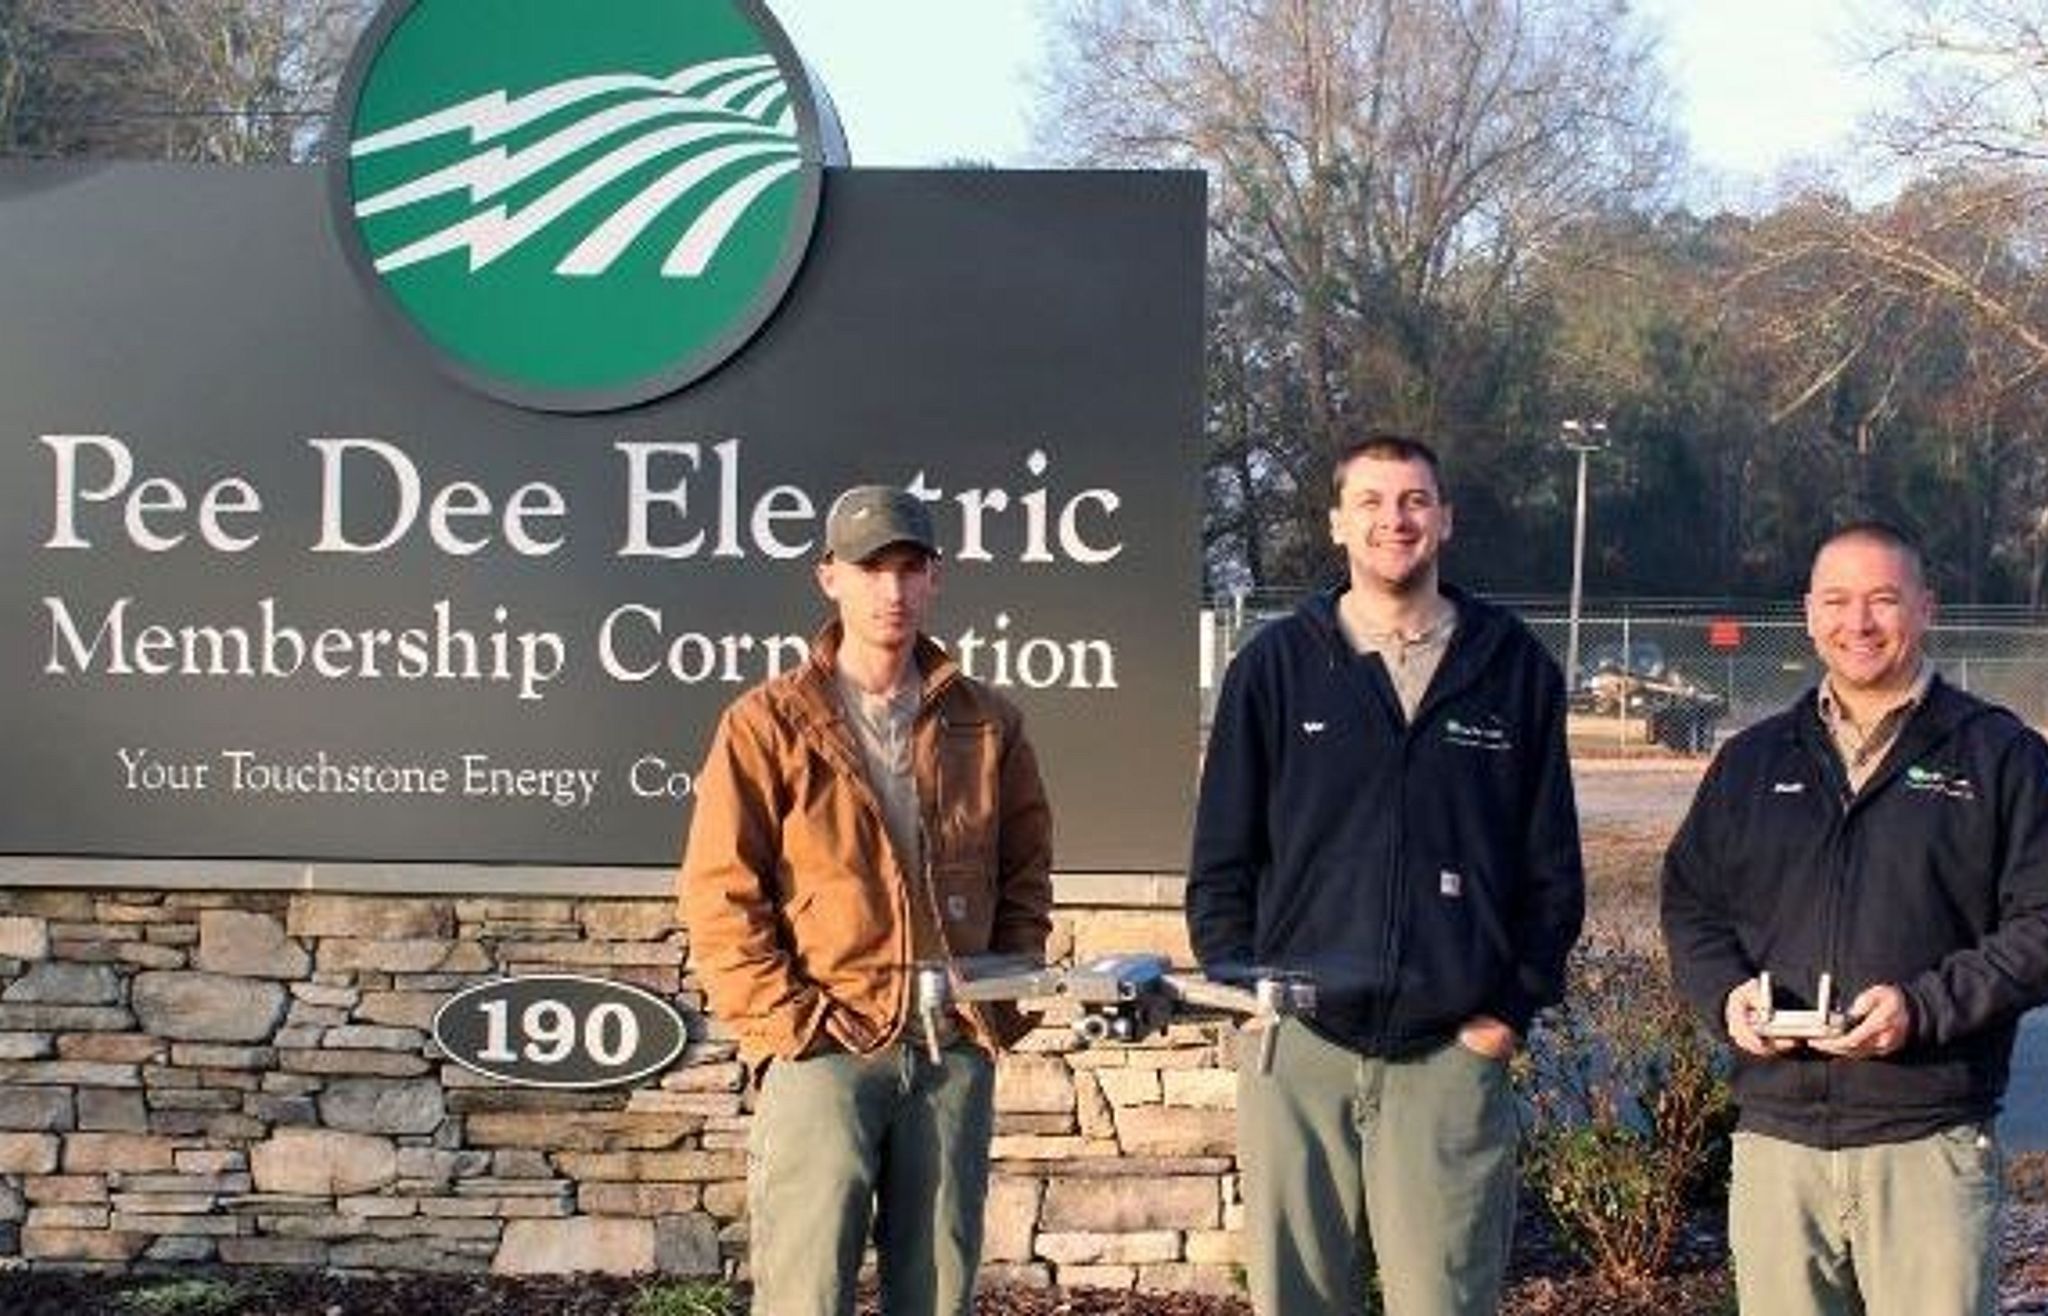 pee-dee-electric-adds-drone-tech-for-inspections-north-carolina-s-electric-cooperatives